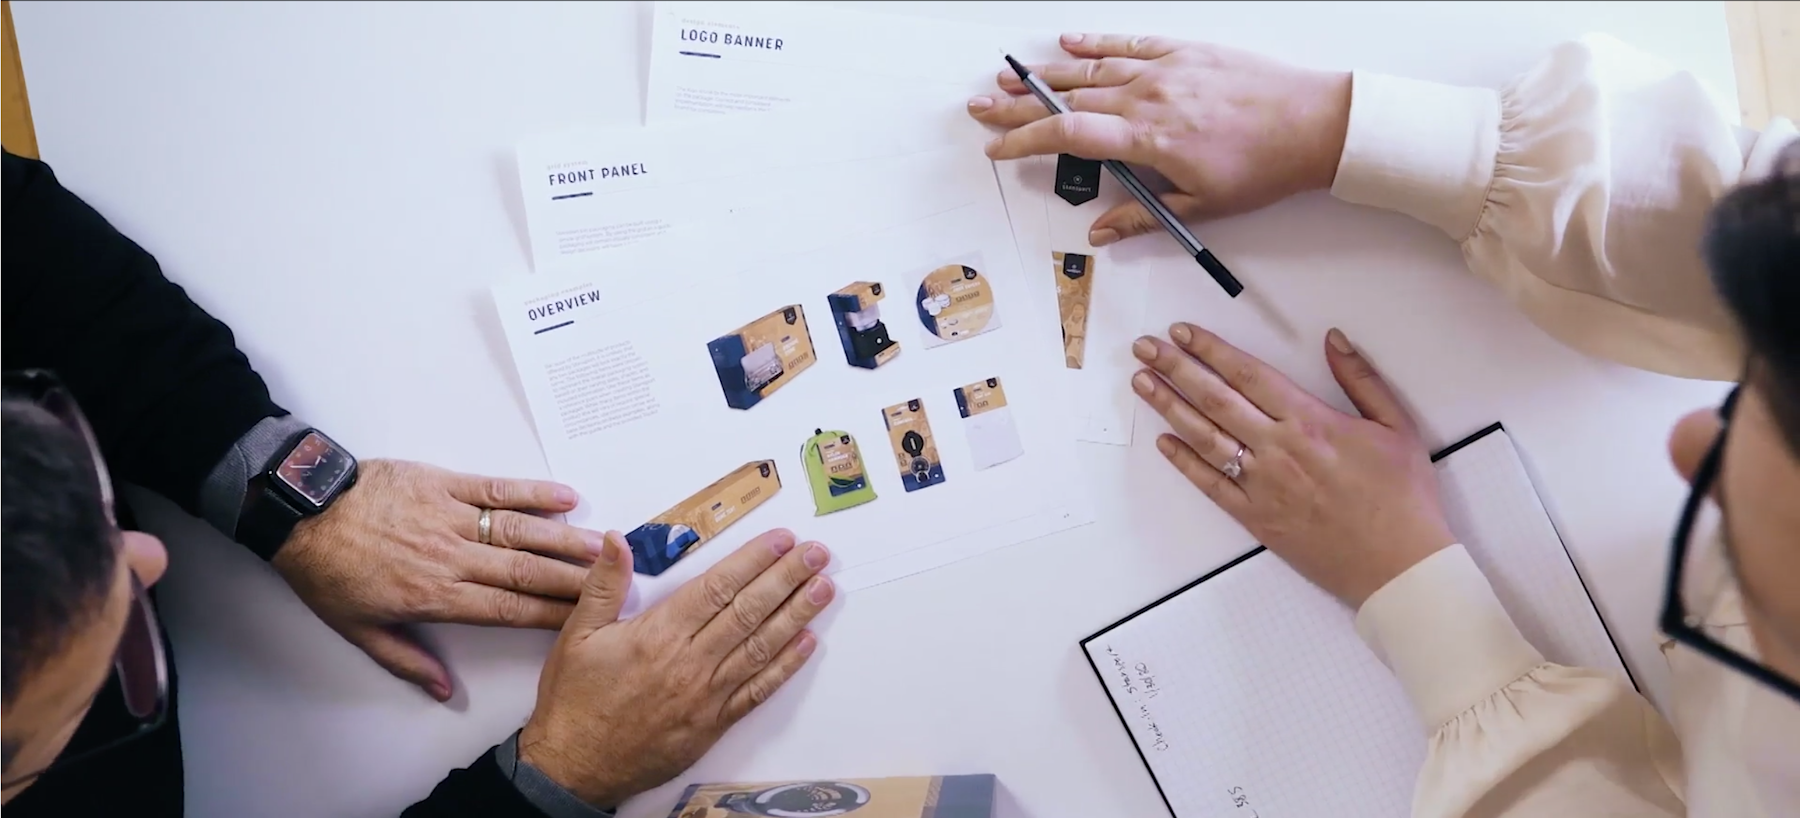 Capsule packaging concepts printed on table with designers reviewing.